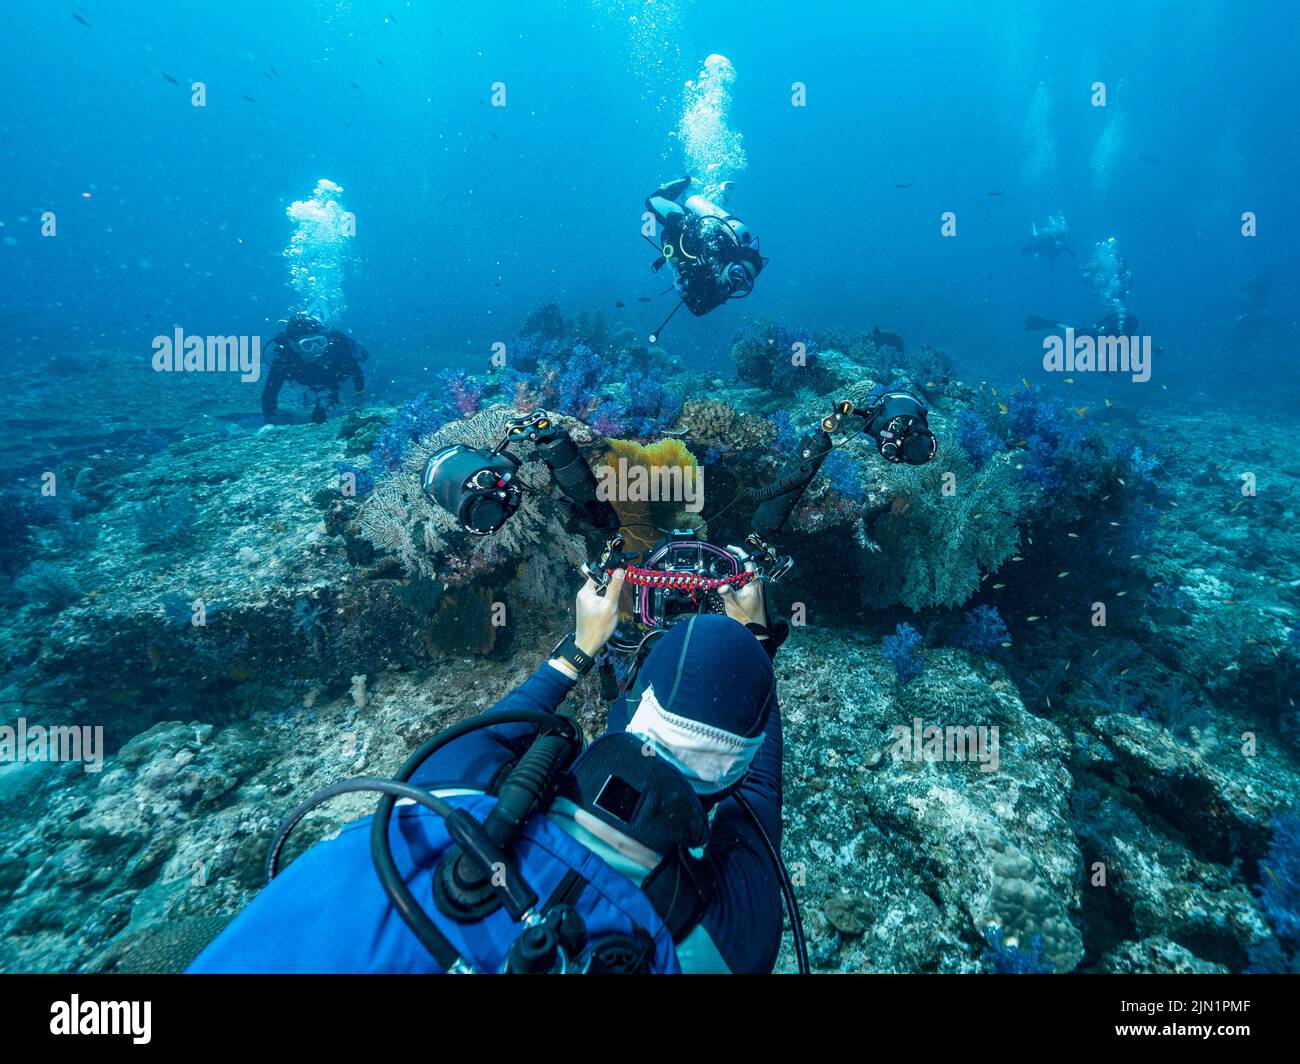 photographer takes picture of divers under water Stock Photo